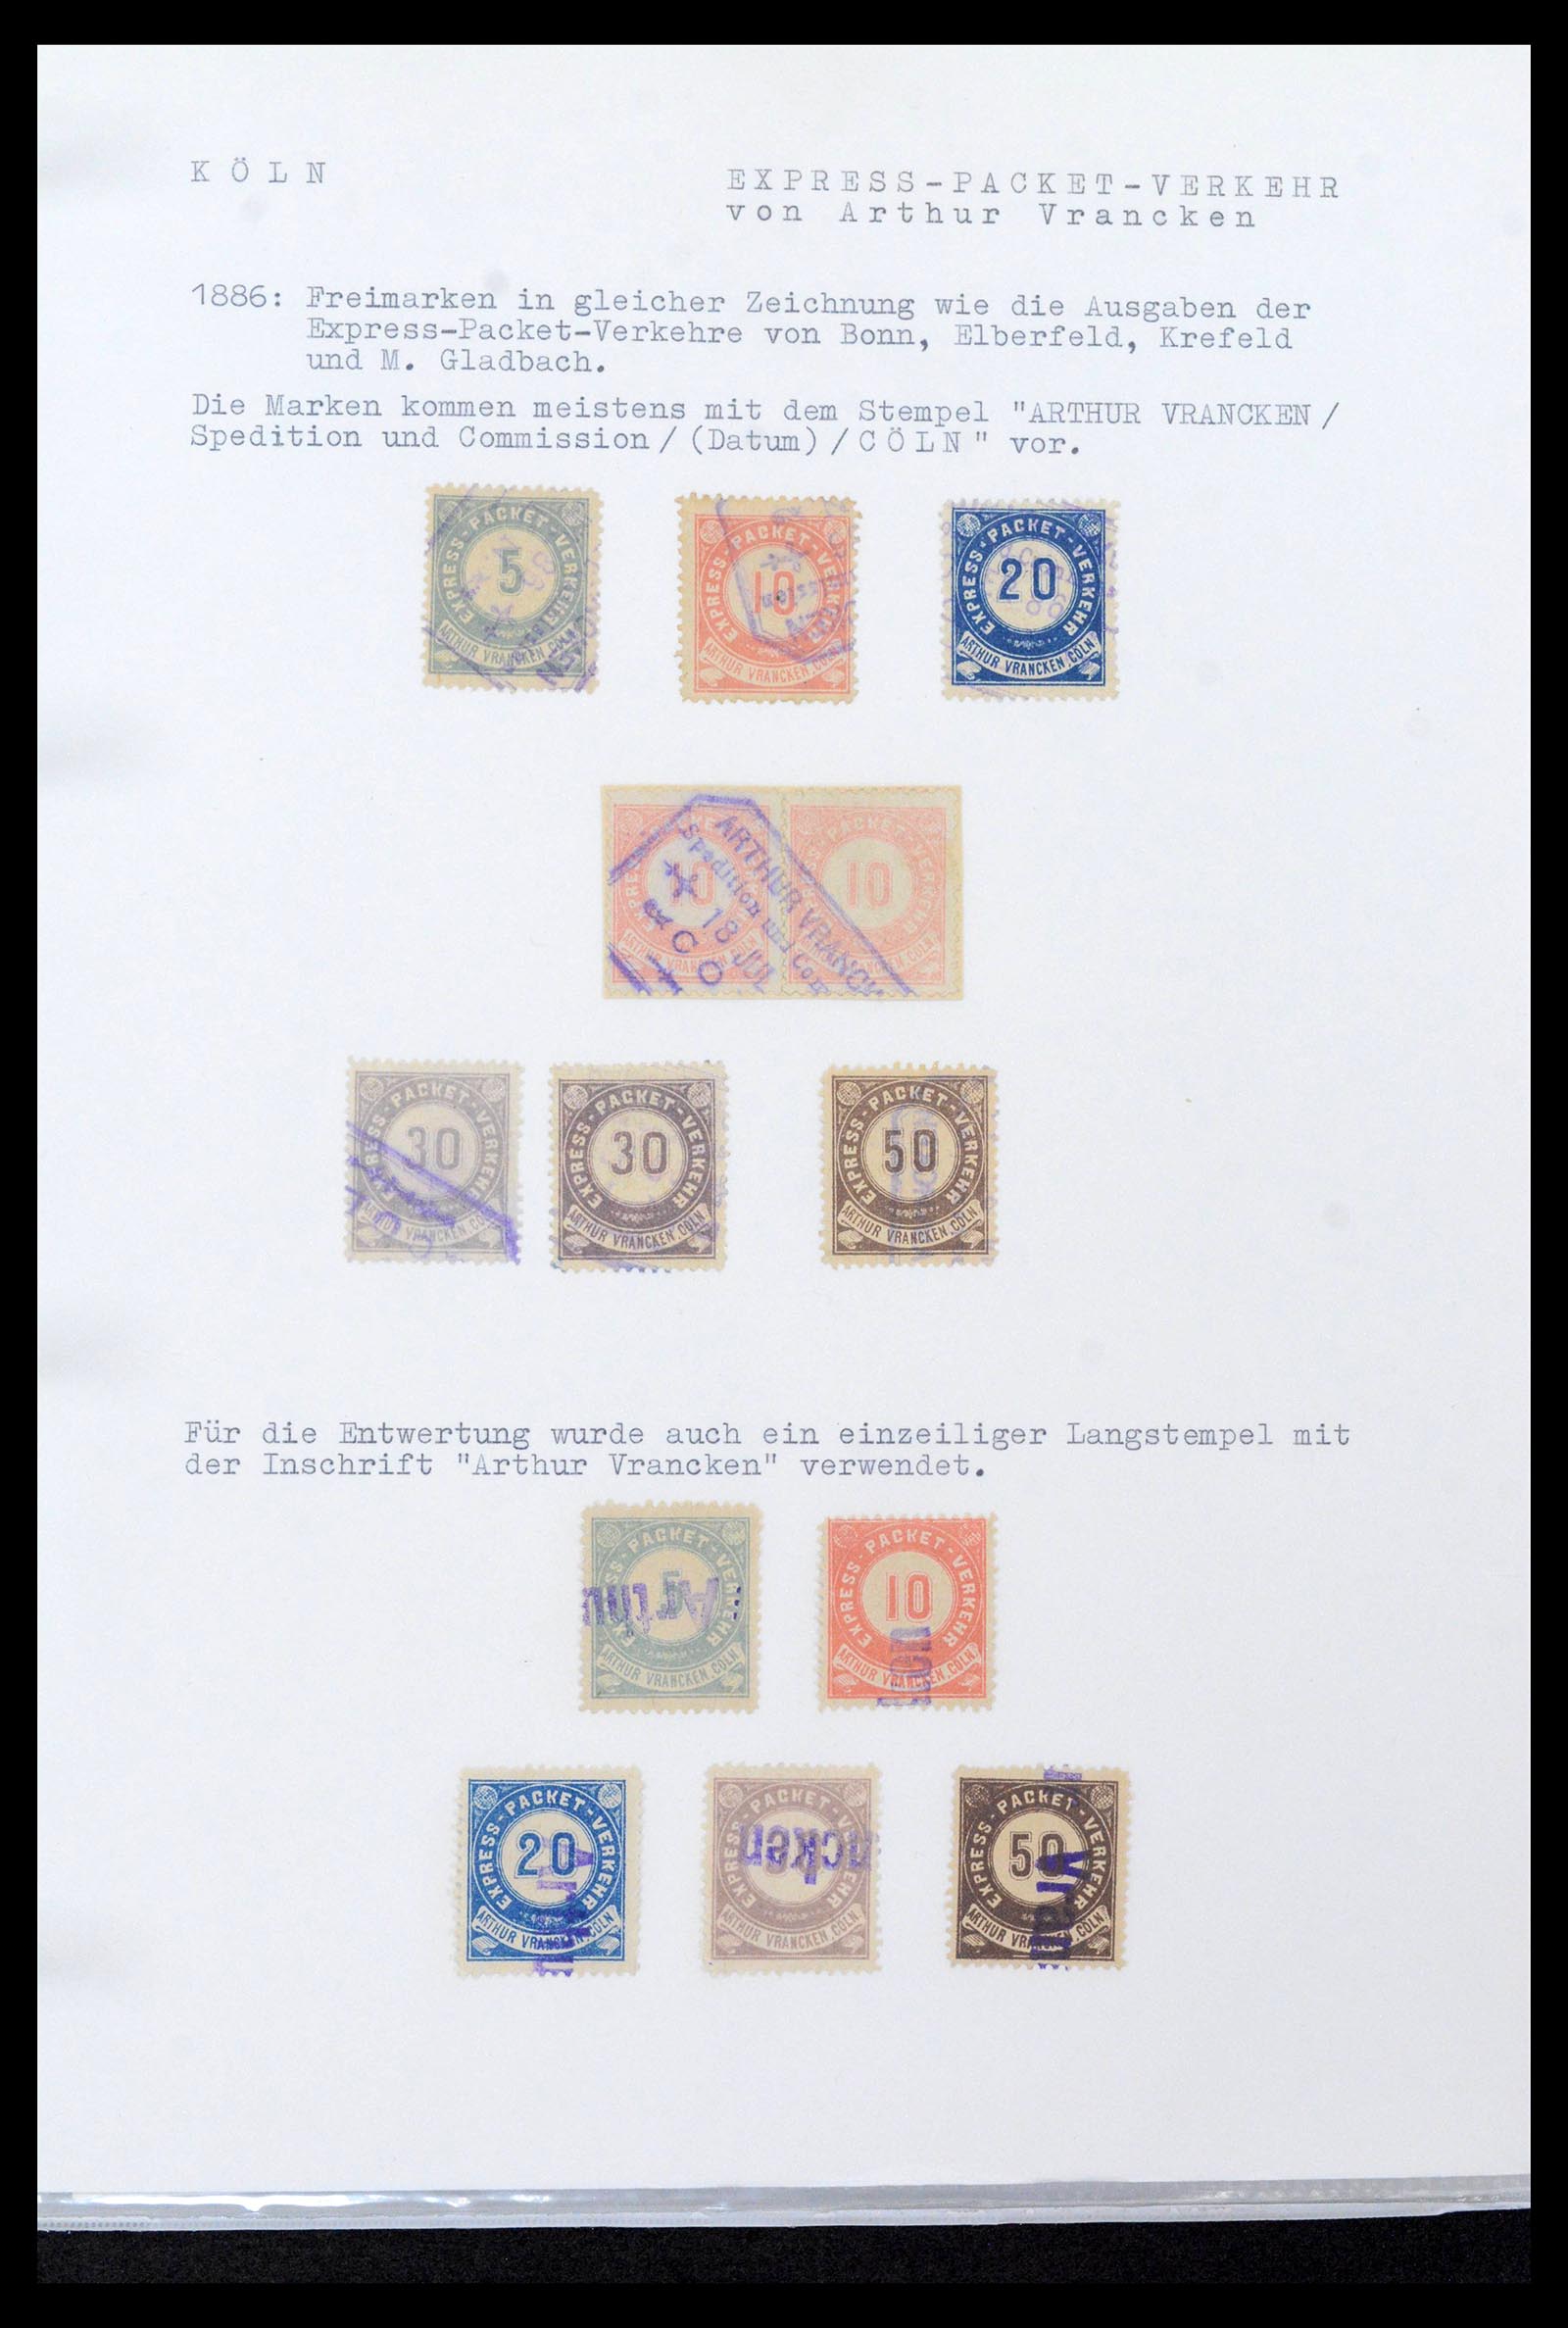 39369 0004 - Stamp collection 39369 Germany citypost 1886-1899.